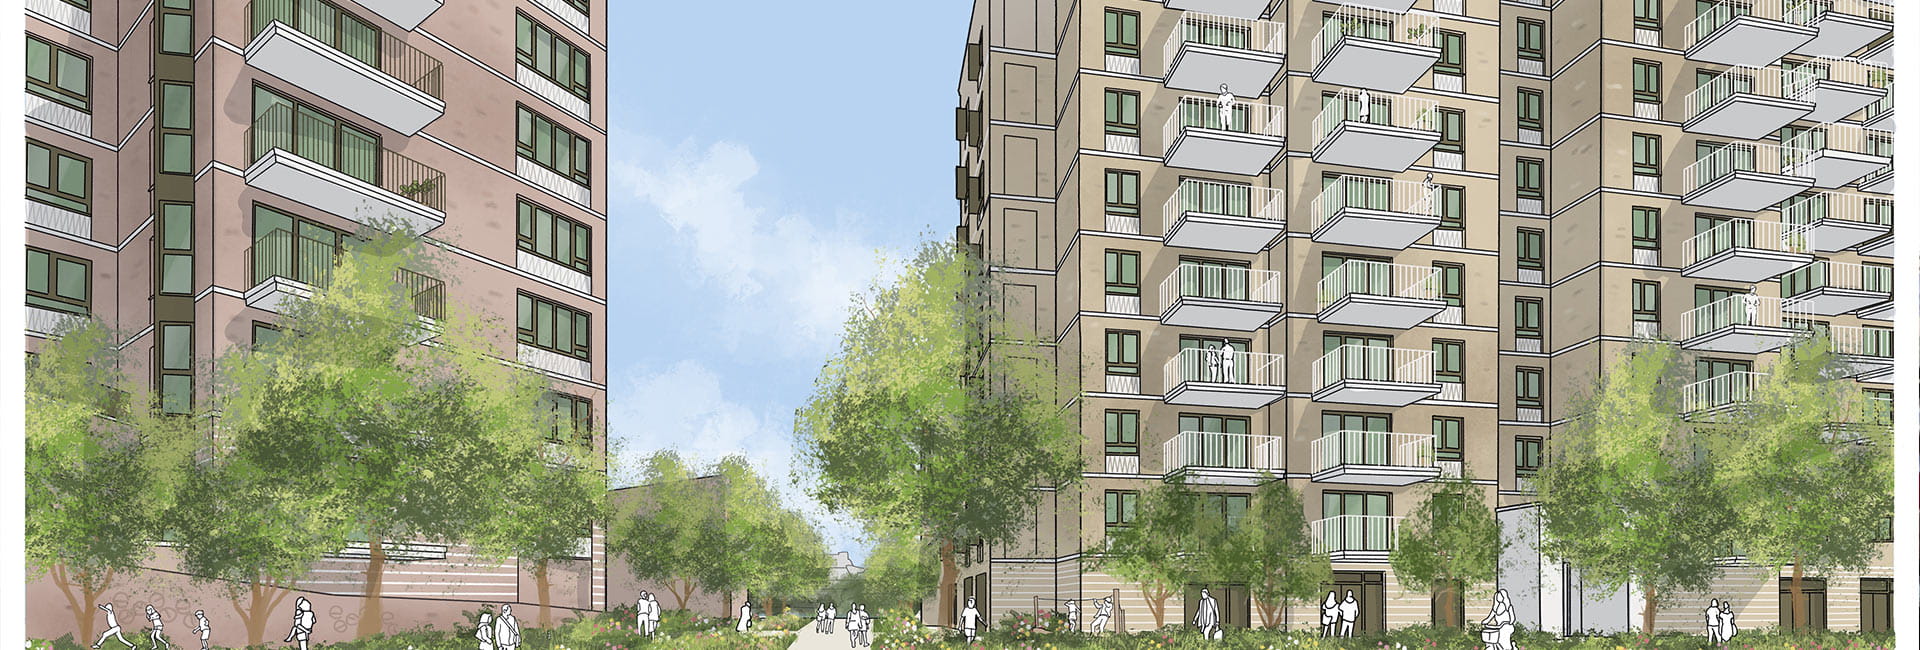 Lombard Square Community - Application for Plot 6 Submitted